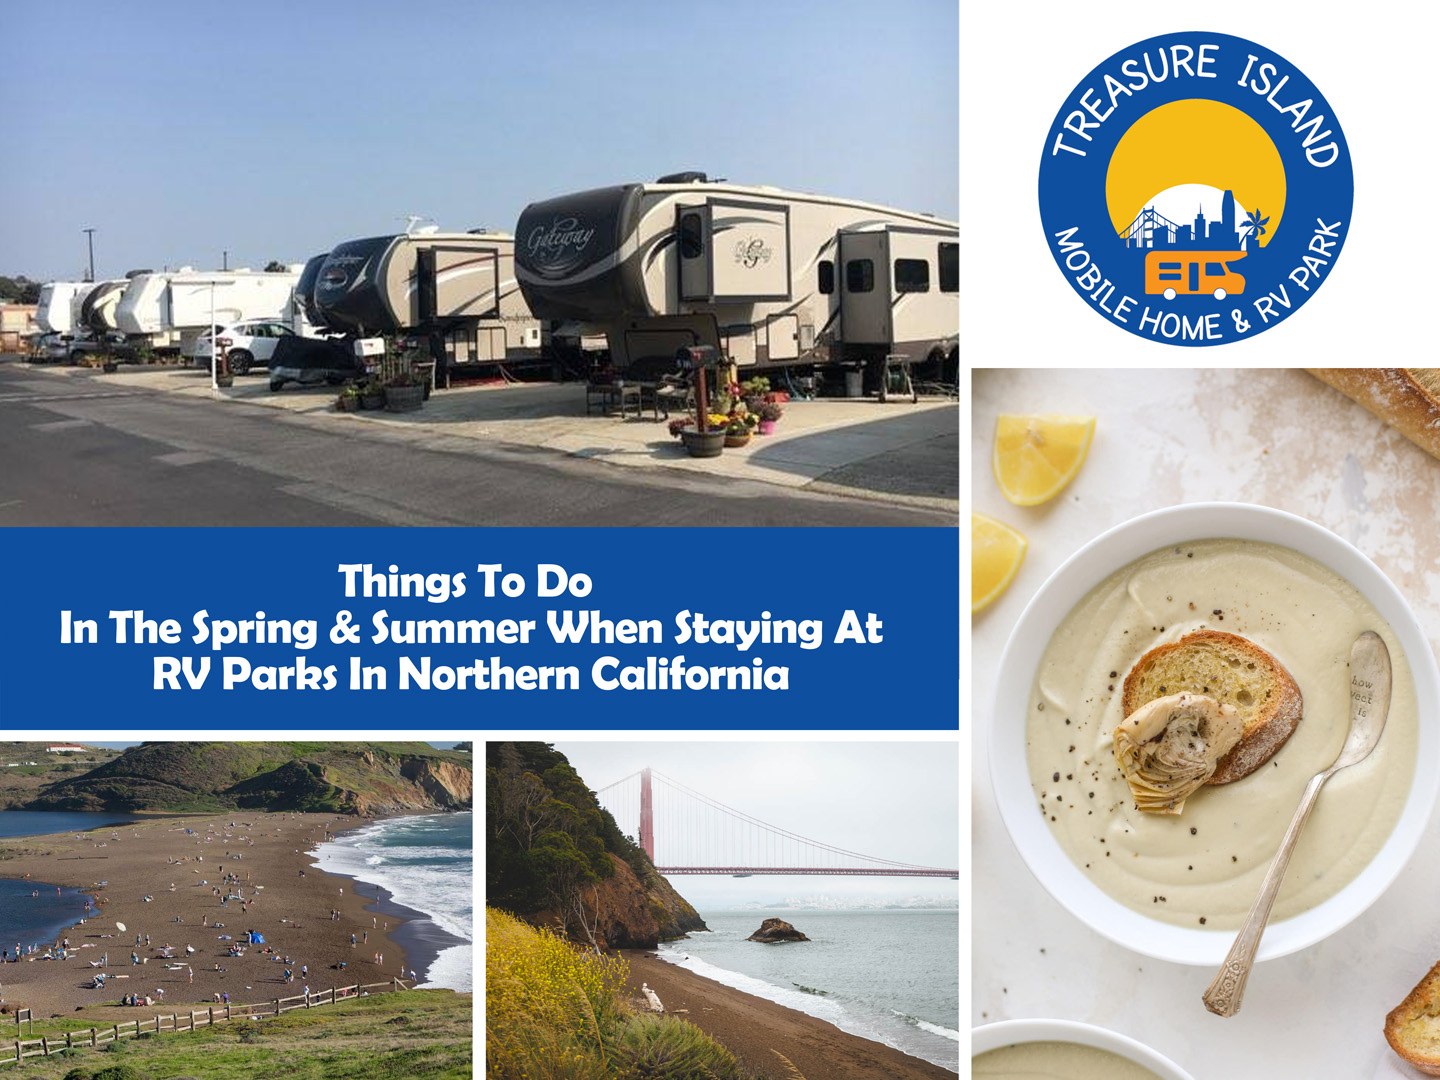 RV Parks In Northern California